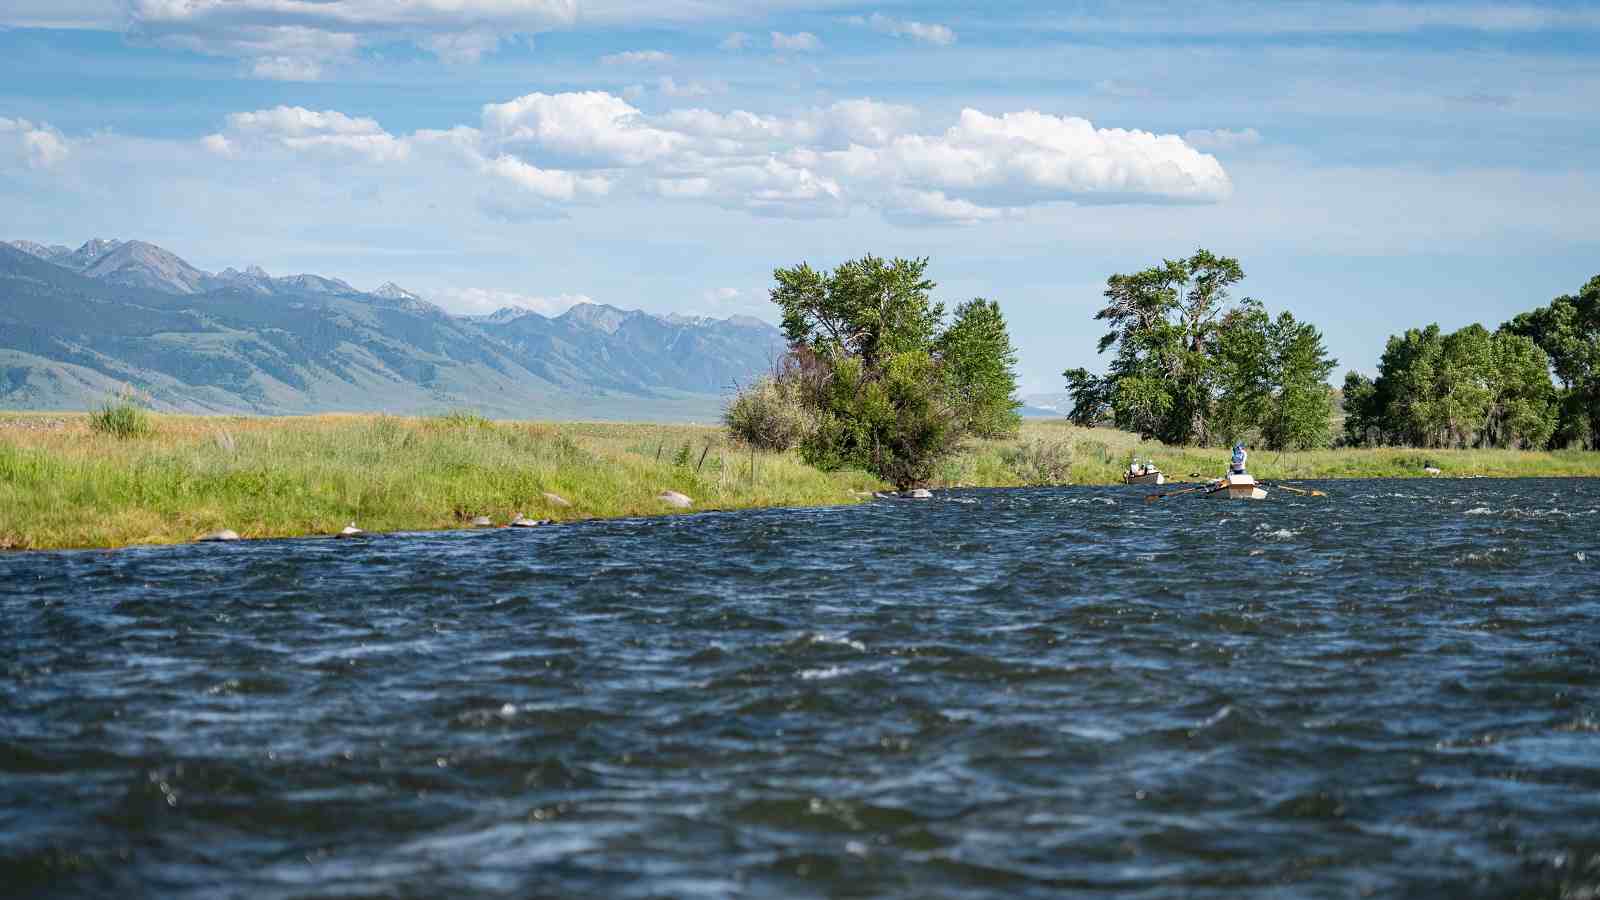 A wide view of two boats floating down a Montana river with mountains in the background during a trip with The Tackle Shop.